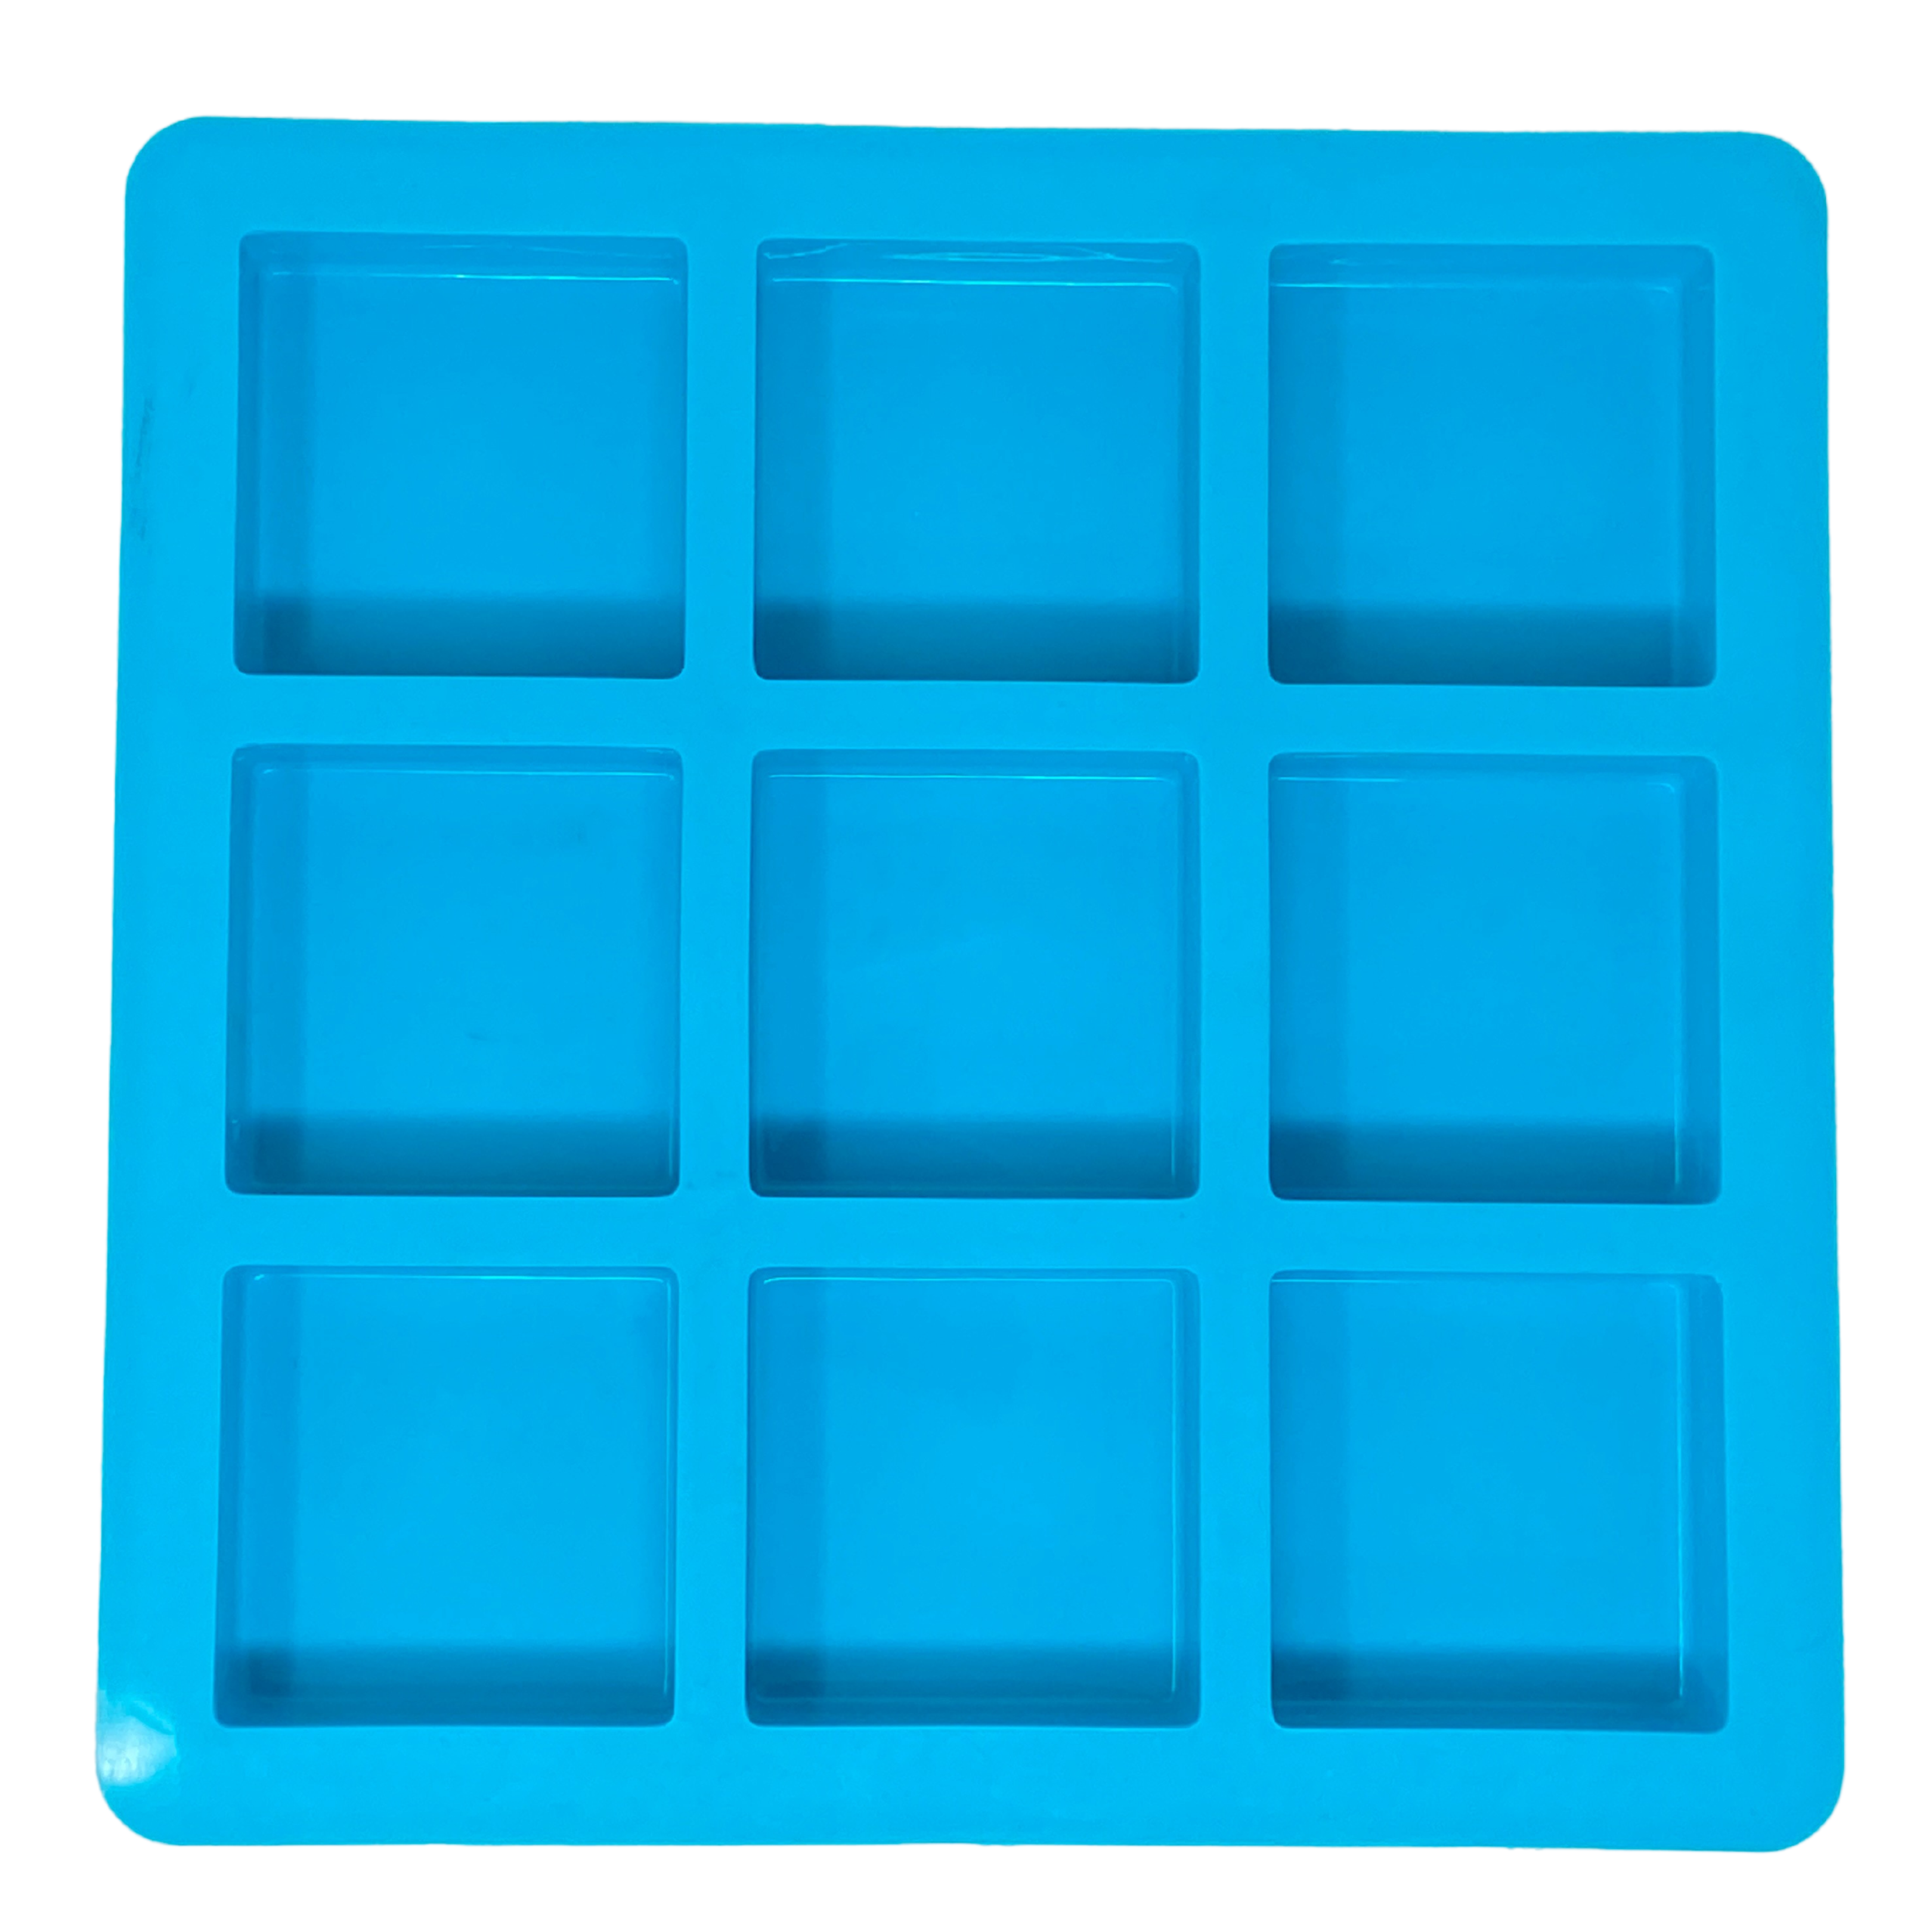 100 Grams Square Soap Mould - The Mould Story